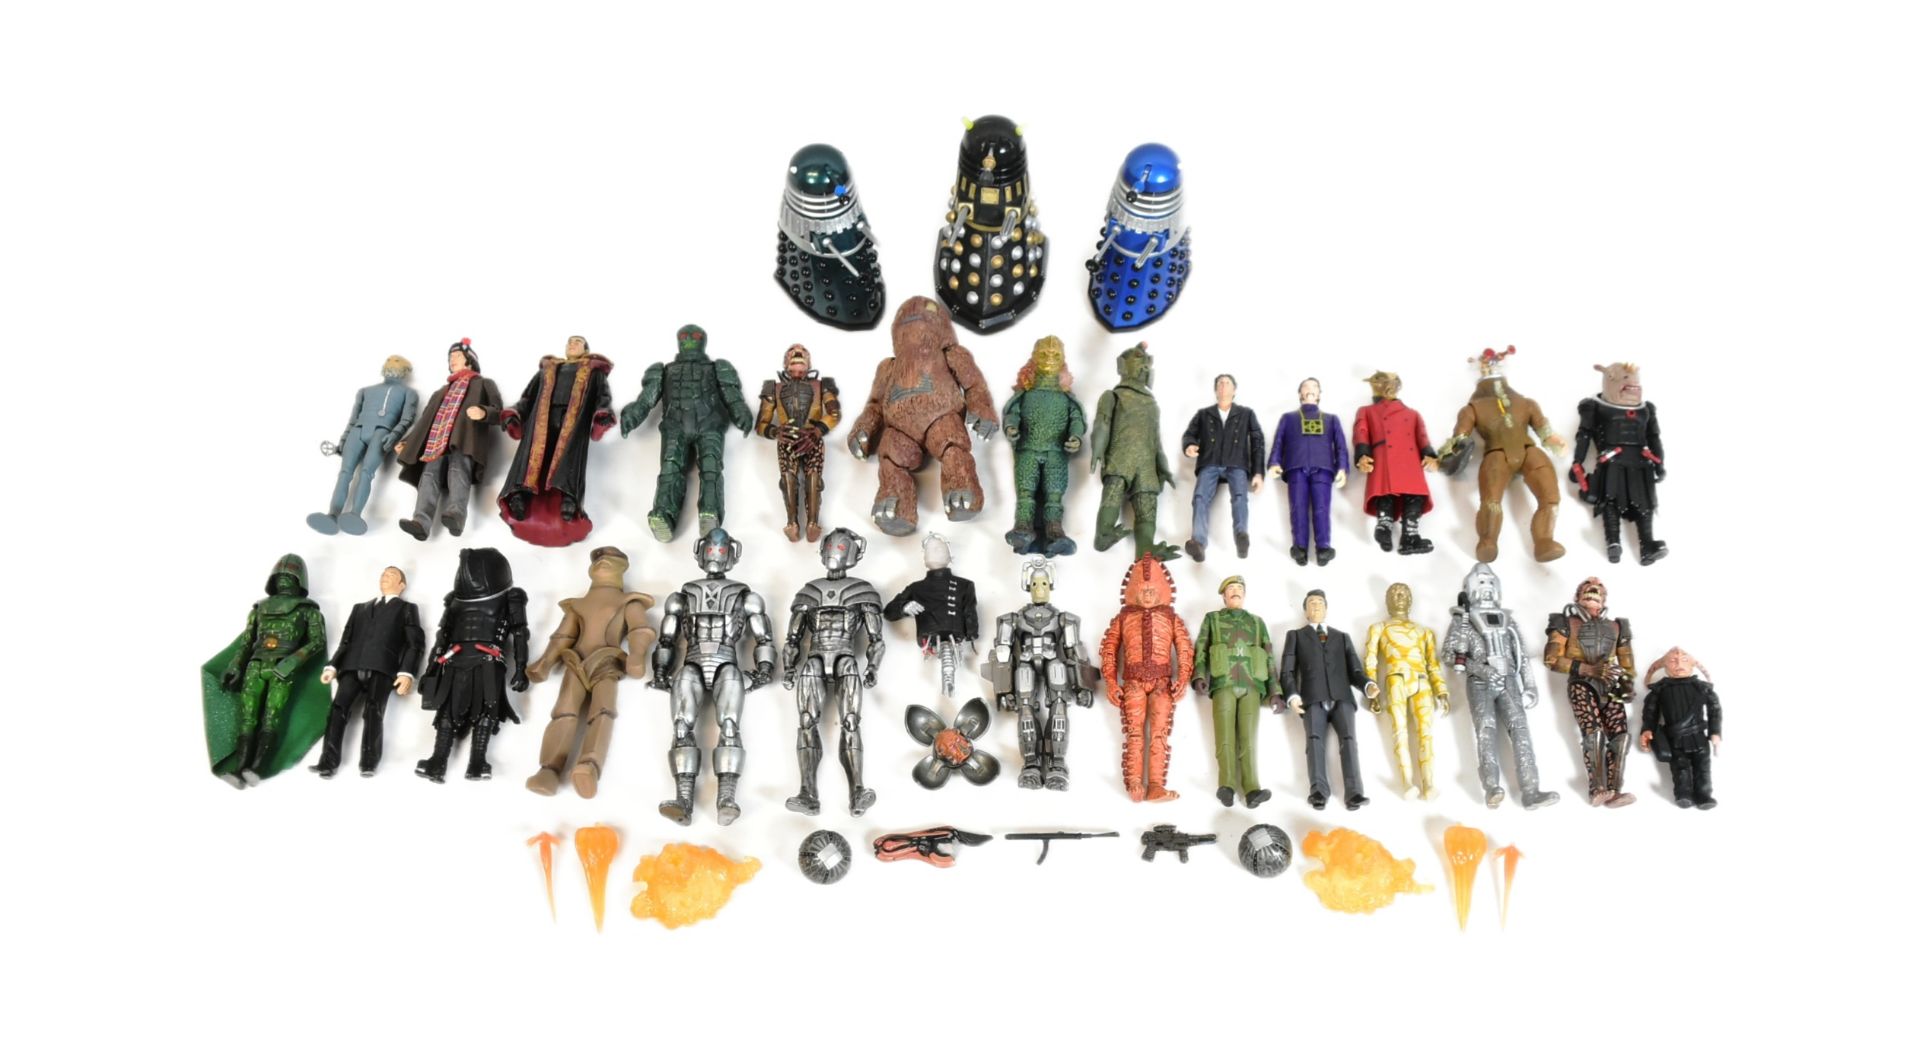 DOCTOR WHO - ACTION FIGURES - 'NEW WHO' & CLASSIC WHO